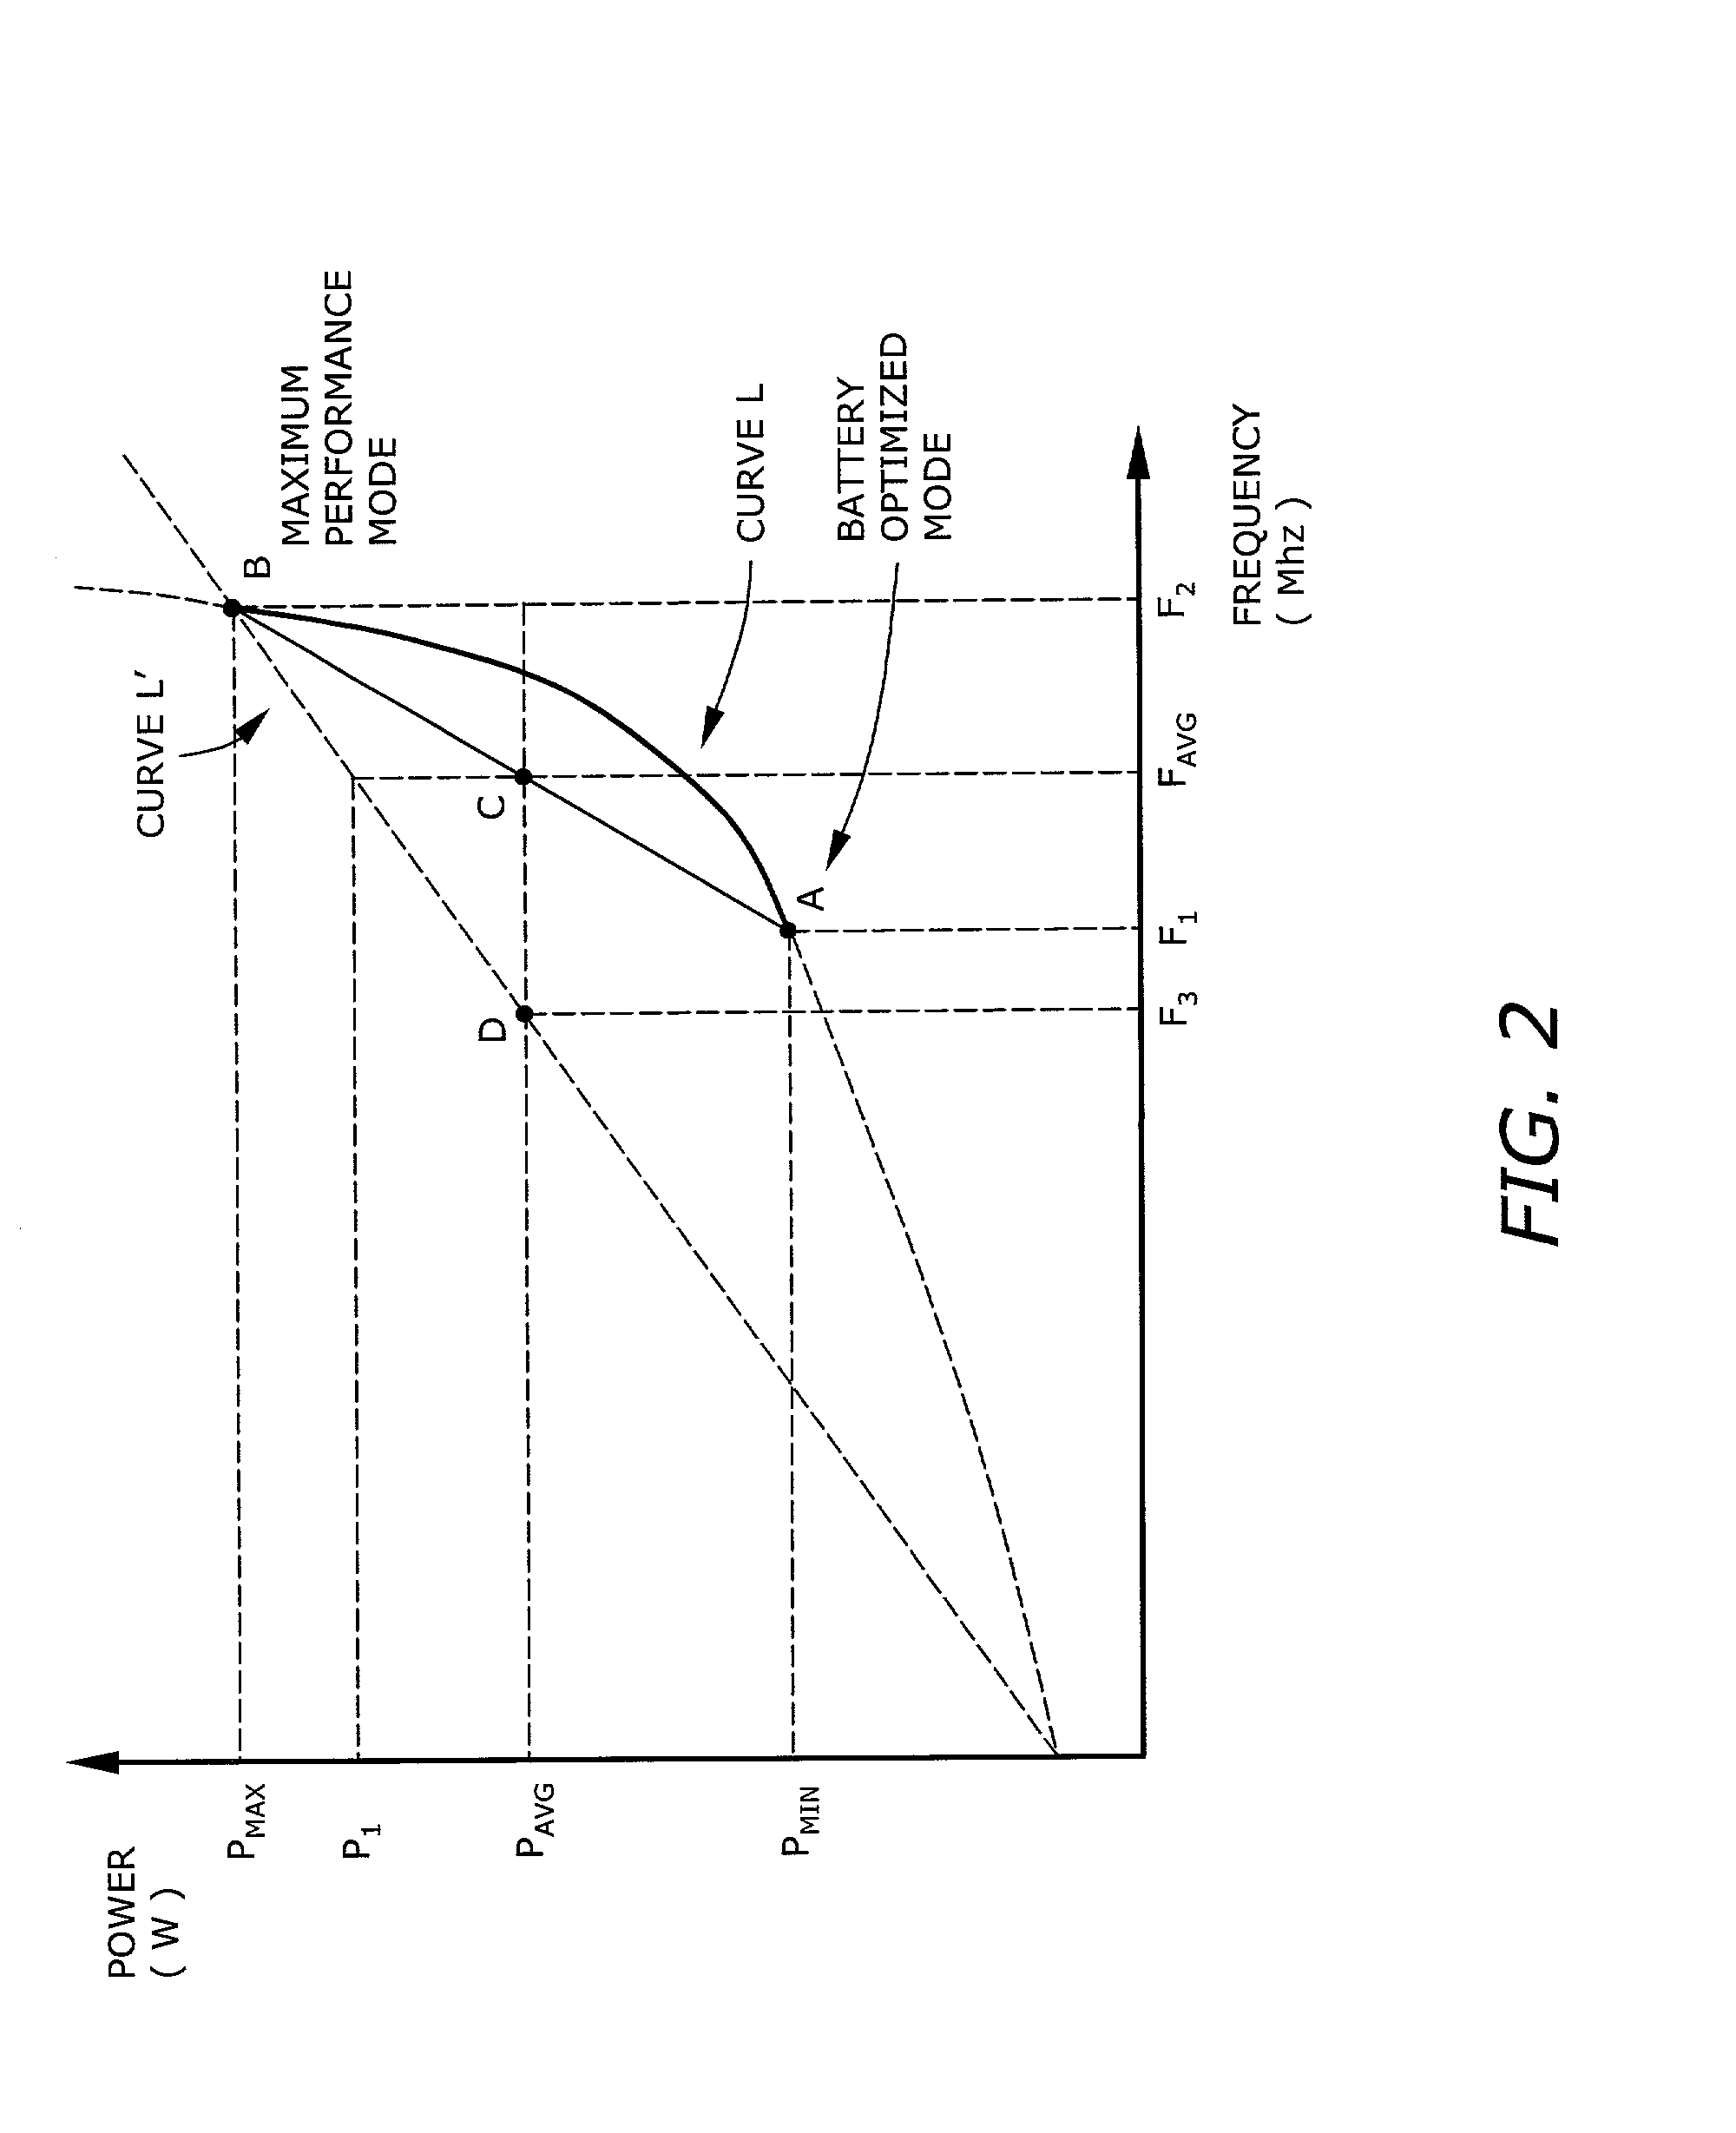 Universal thermal management by interacting with speed step technology applet and operating system having native performance control